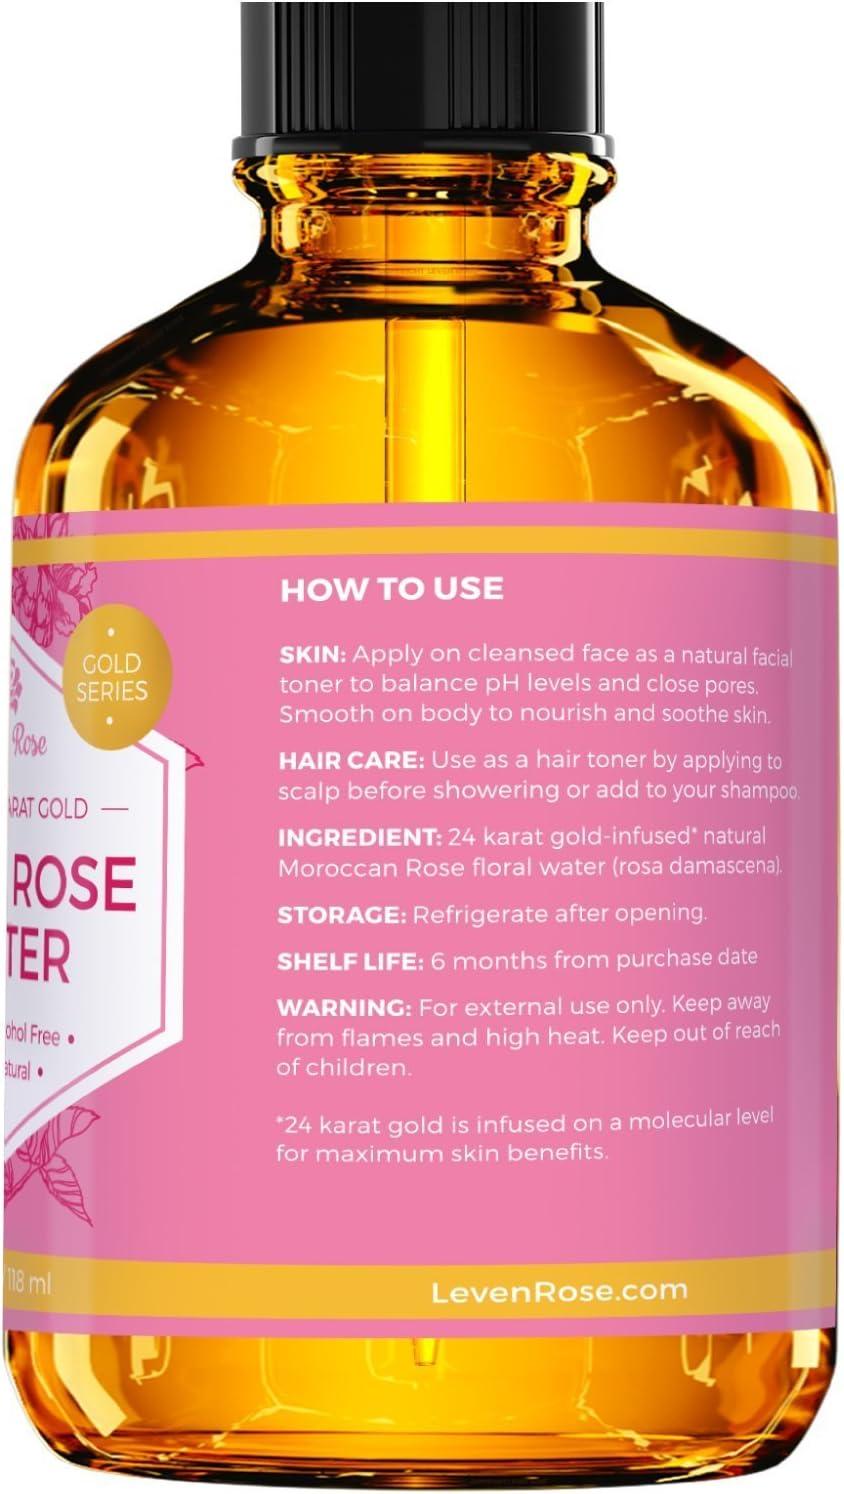 Carrot Seed Oil by Leven Rose Pure Unrefined Cold Pressed Moisturizer for Hair Skin and Nails 1 oz 1 fl oz